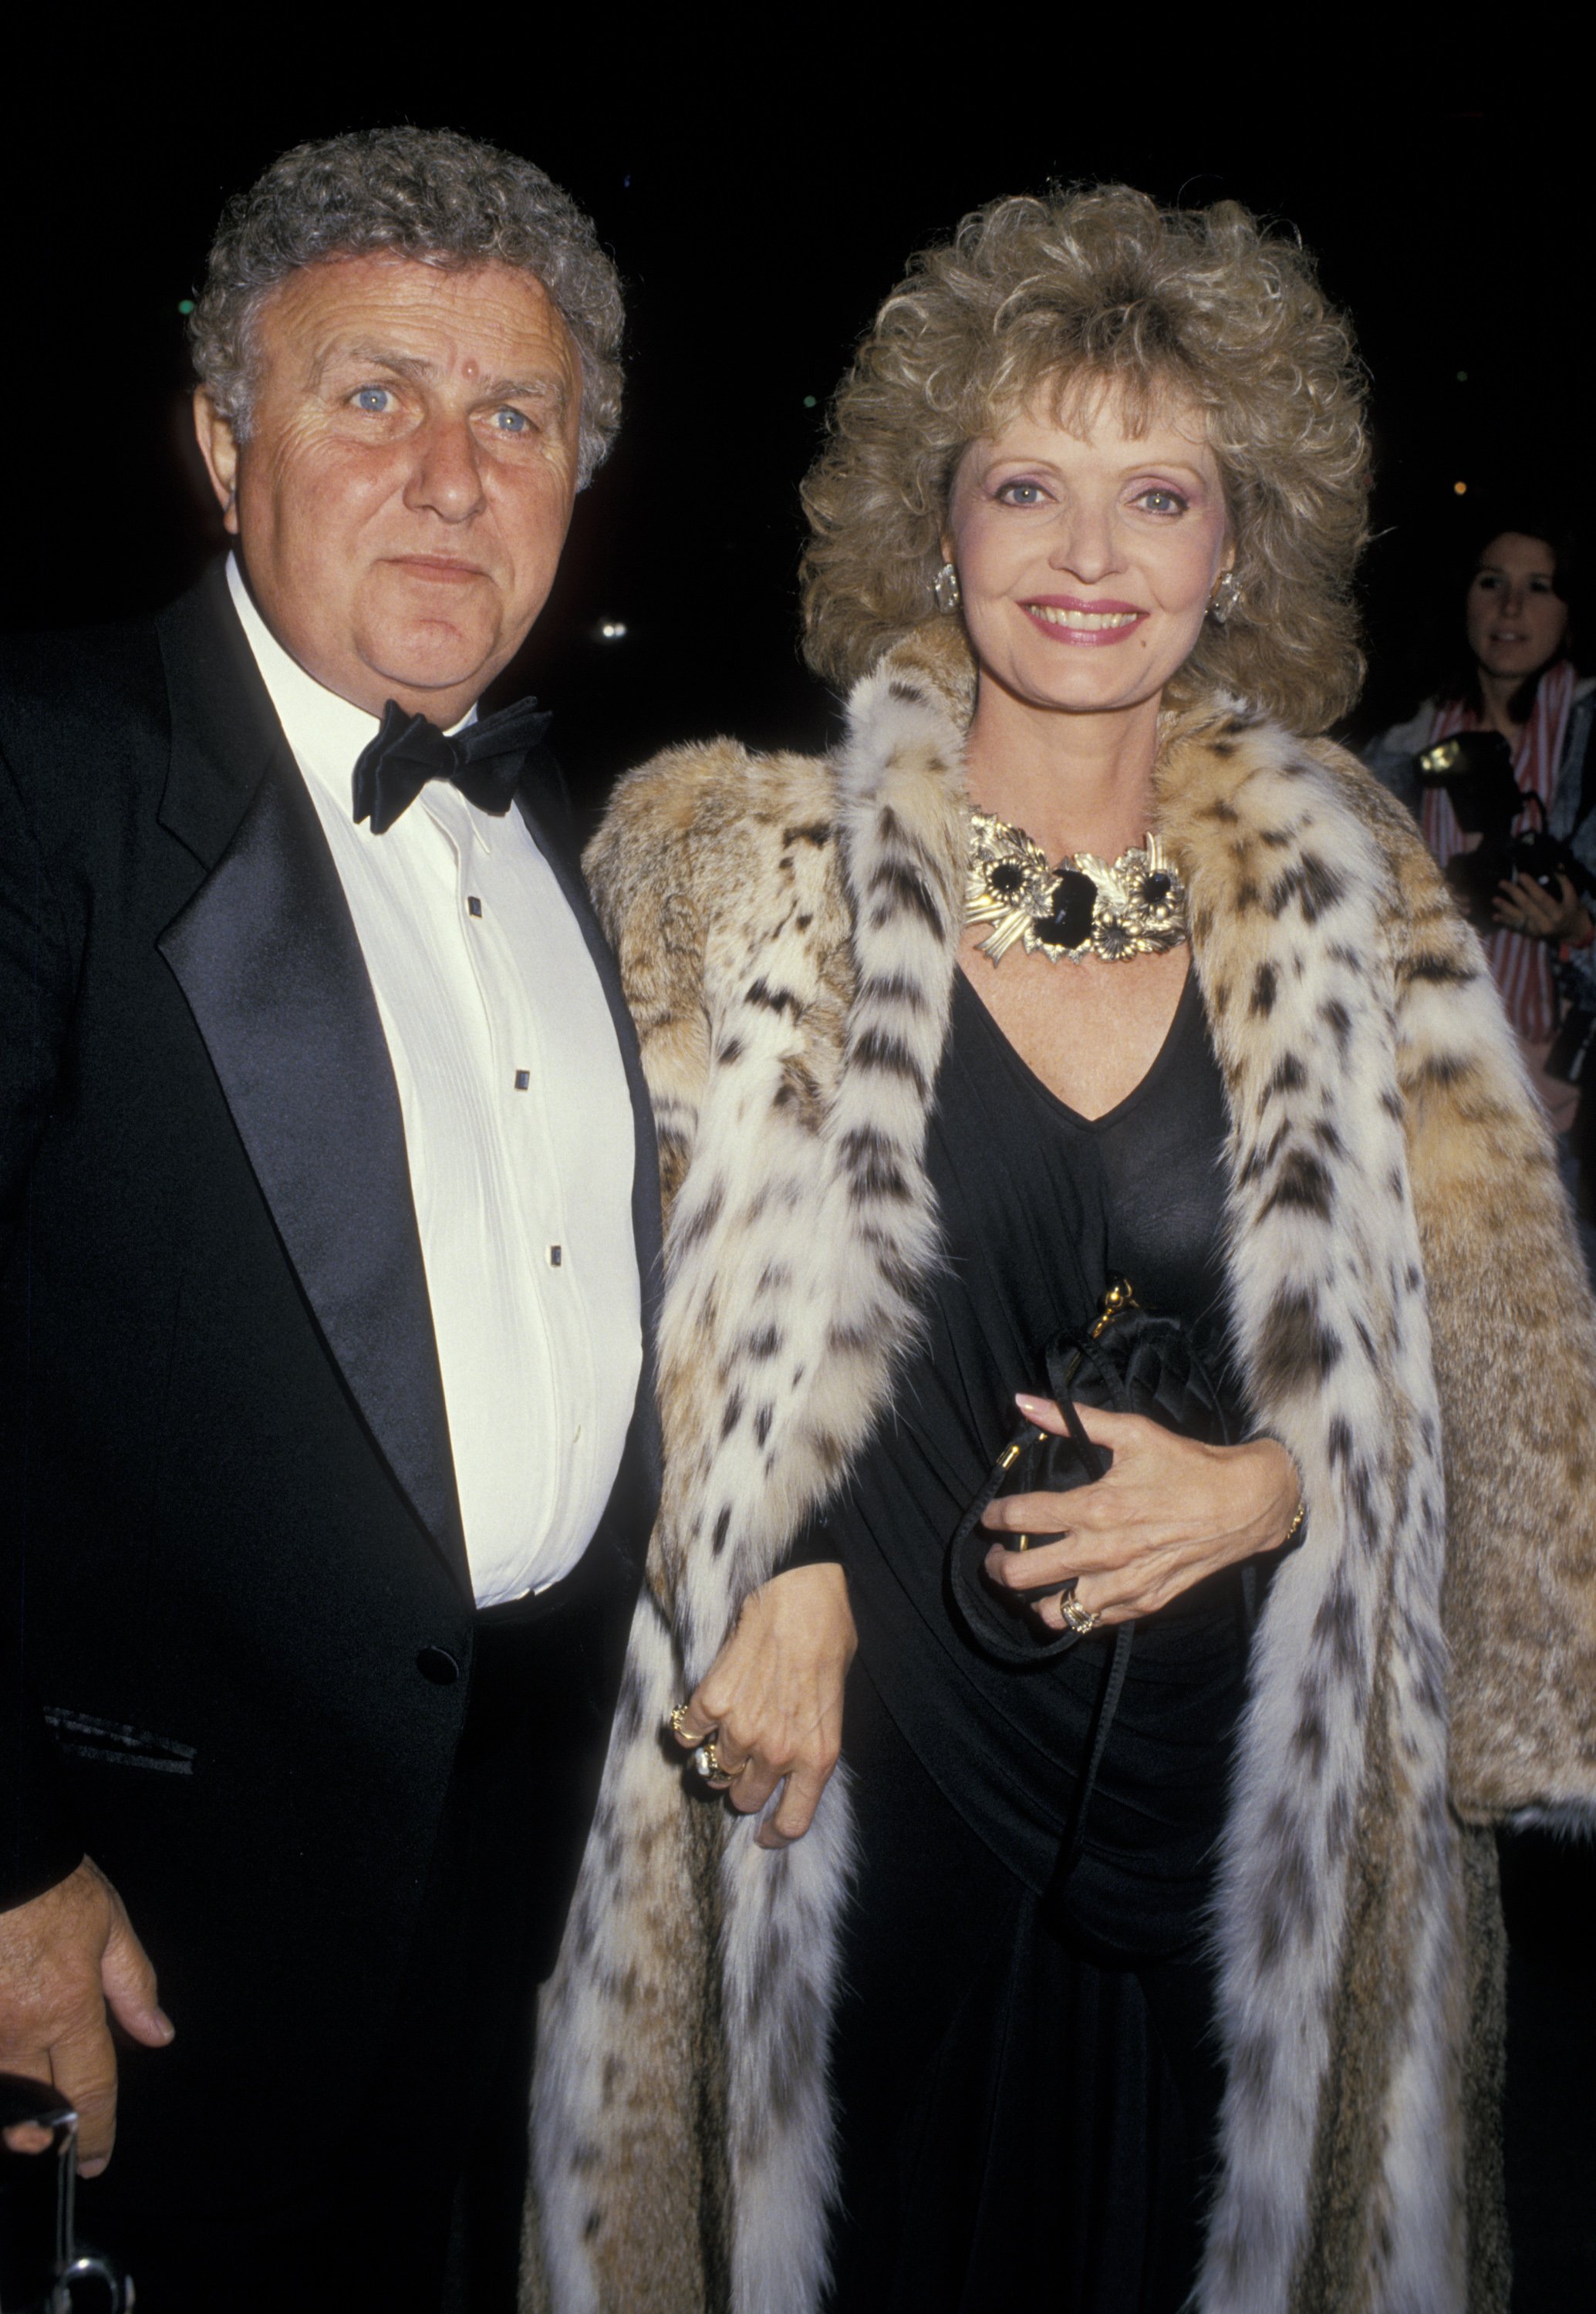 John Kappas and Florence Henderson at the “Variety Club International All-Star Party” on November 22, 1987, in Burbank, California | Photo: Getty Images